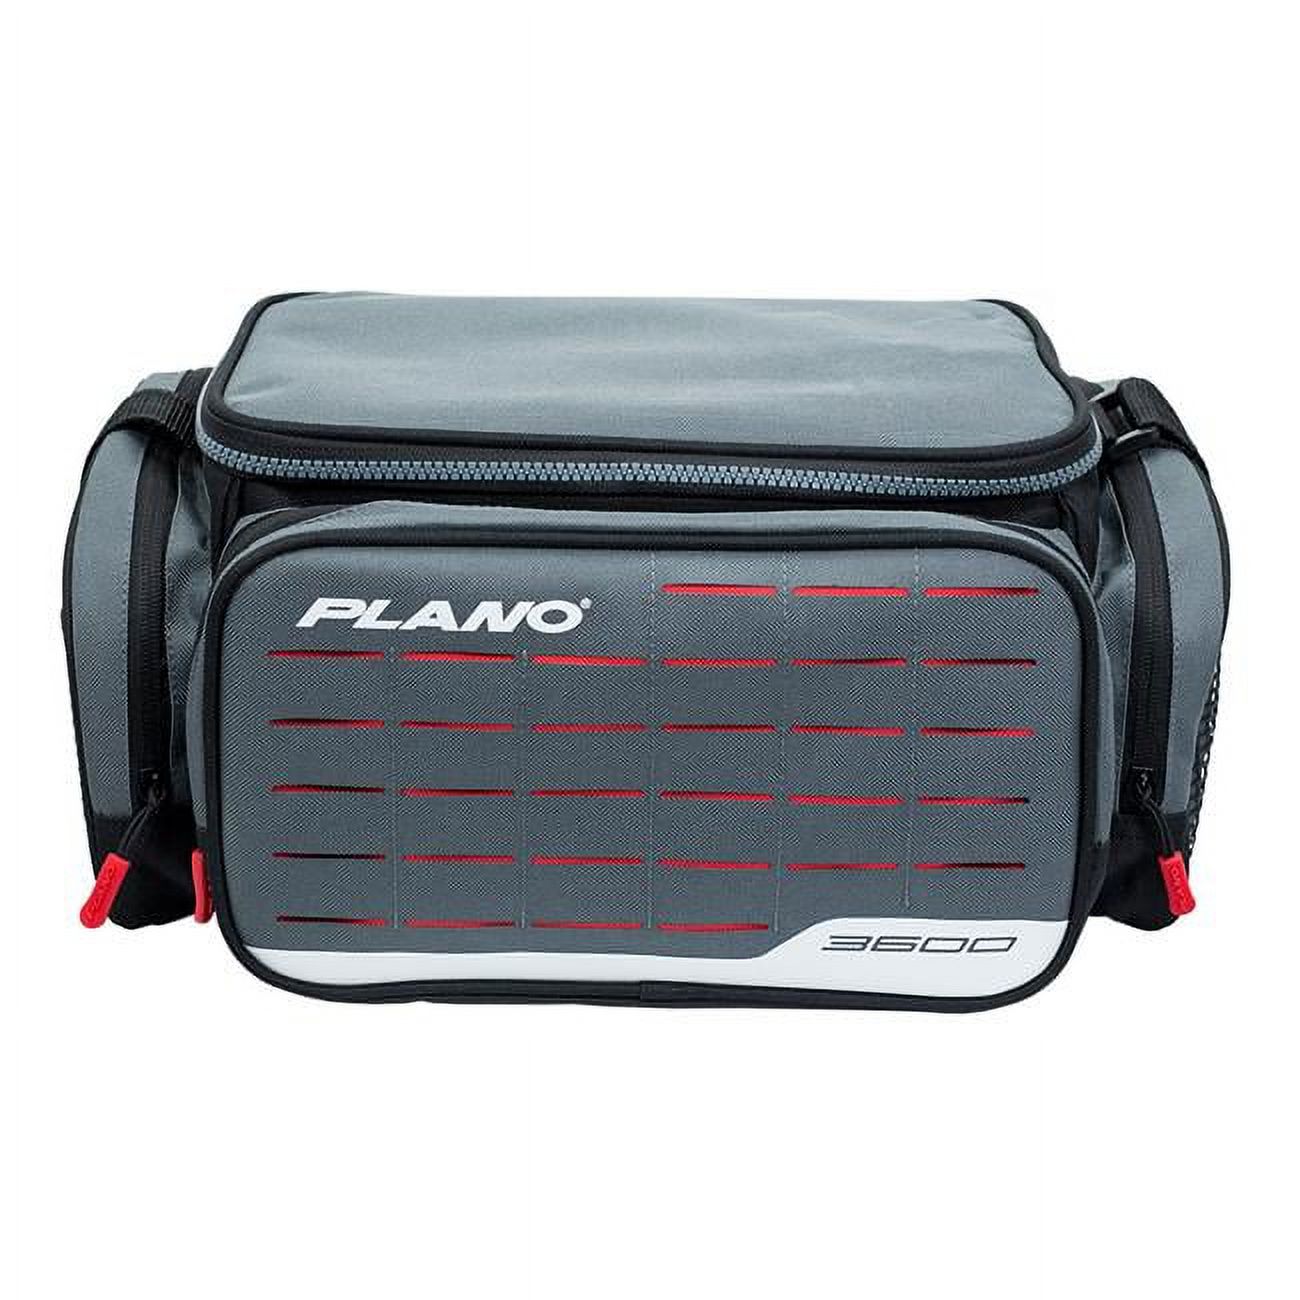 Plano Weekend Series 3600 Tackle Case, Includes 2 StowAway Boxes - image 1 of 2